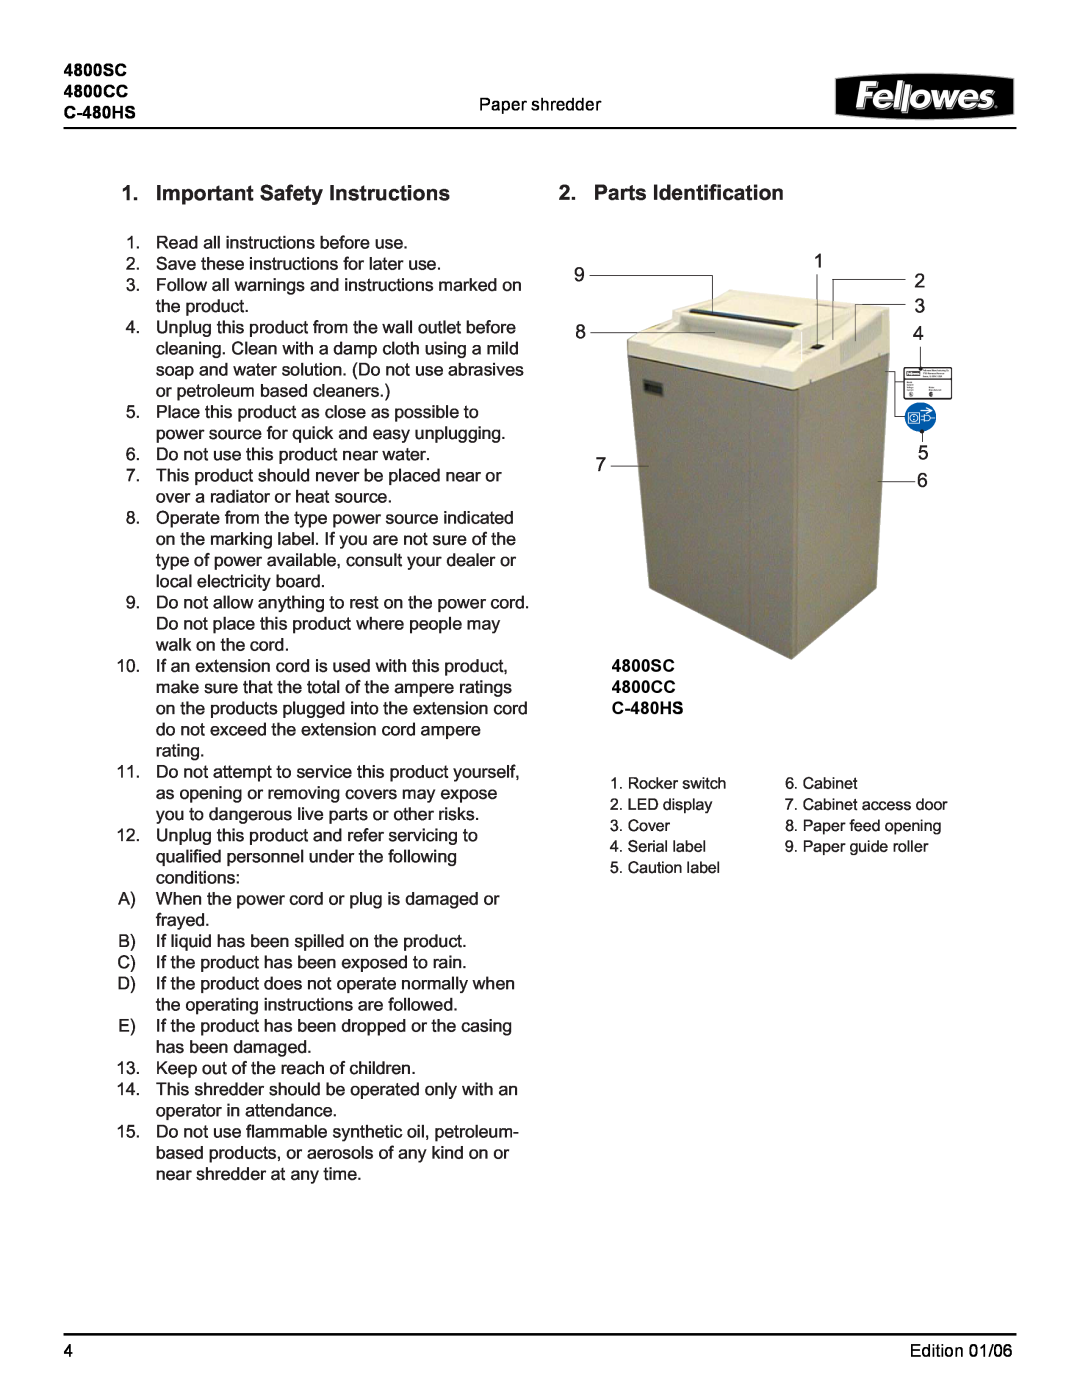 Fellowes 4800CC manual Important Safety Instructions, Parts Identification, 4800SC, Paper shredder, C-480HS 